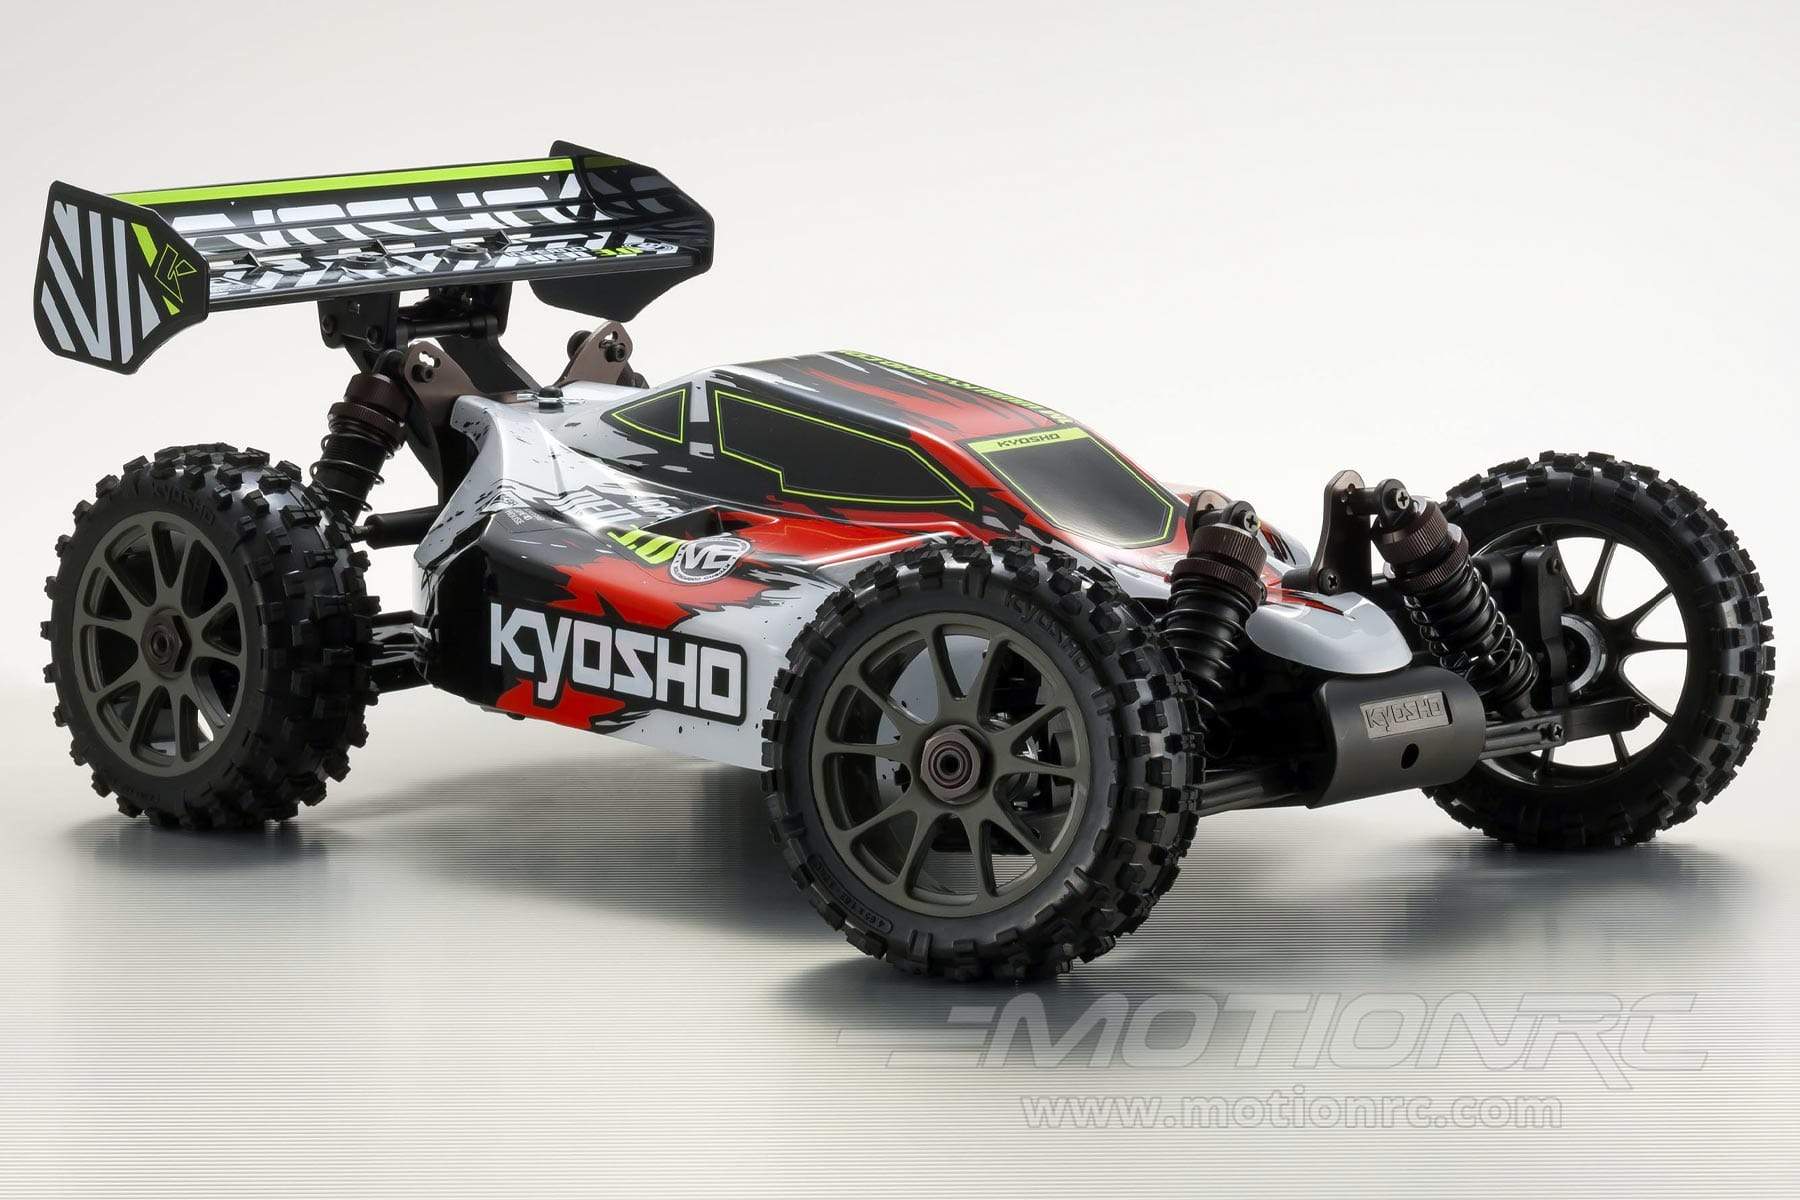 4wd buggy